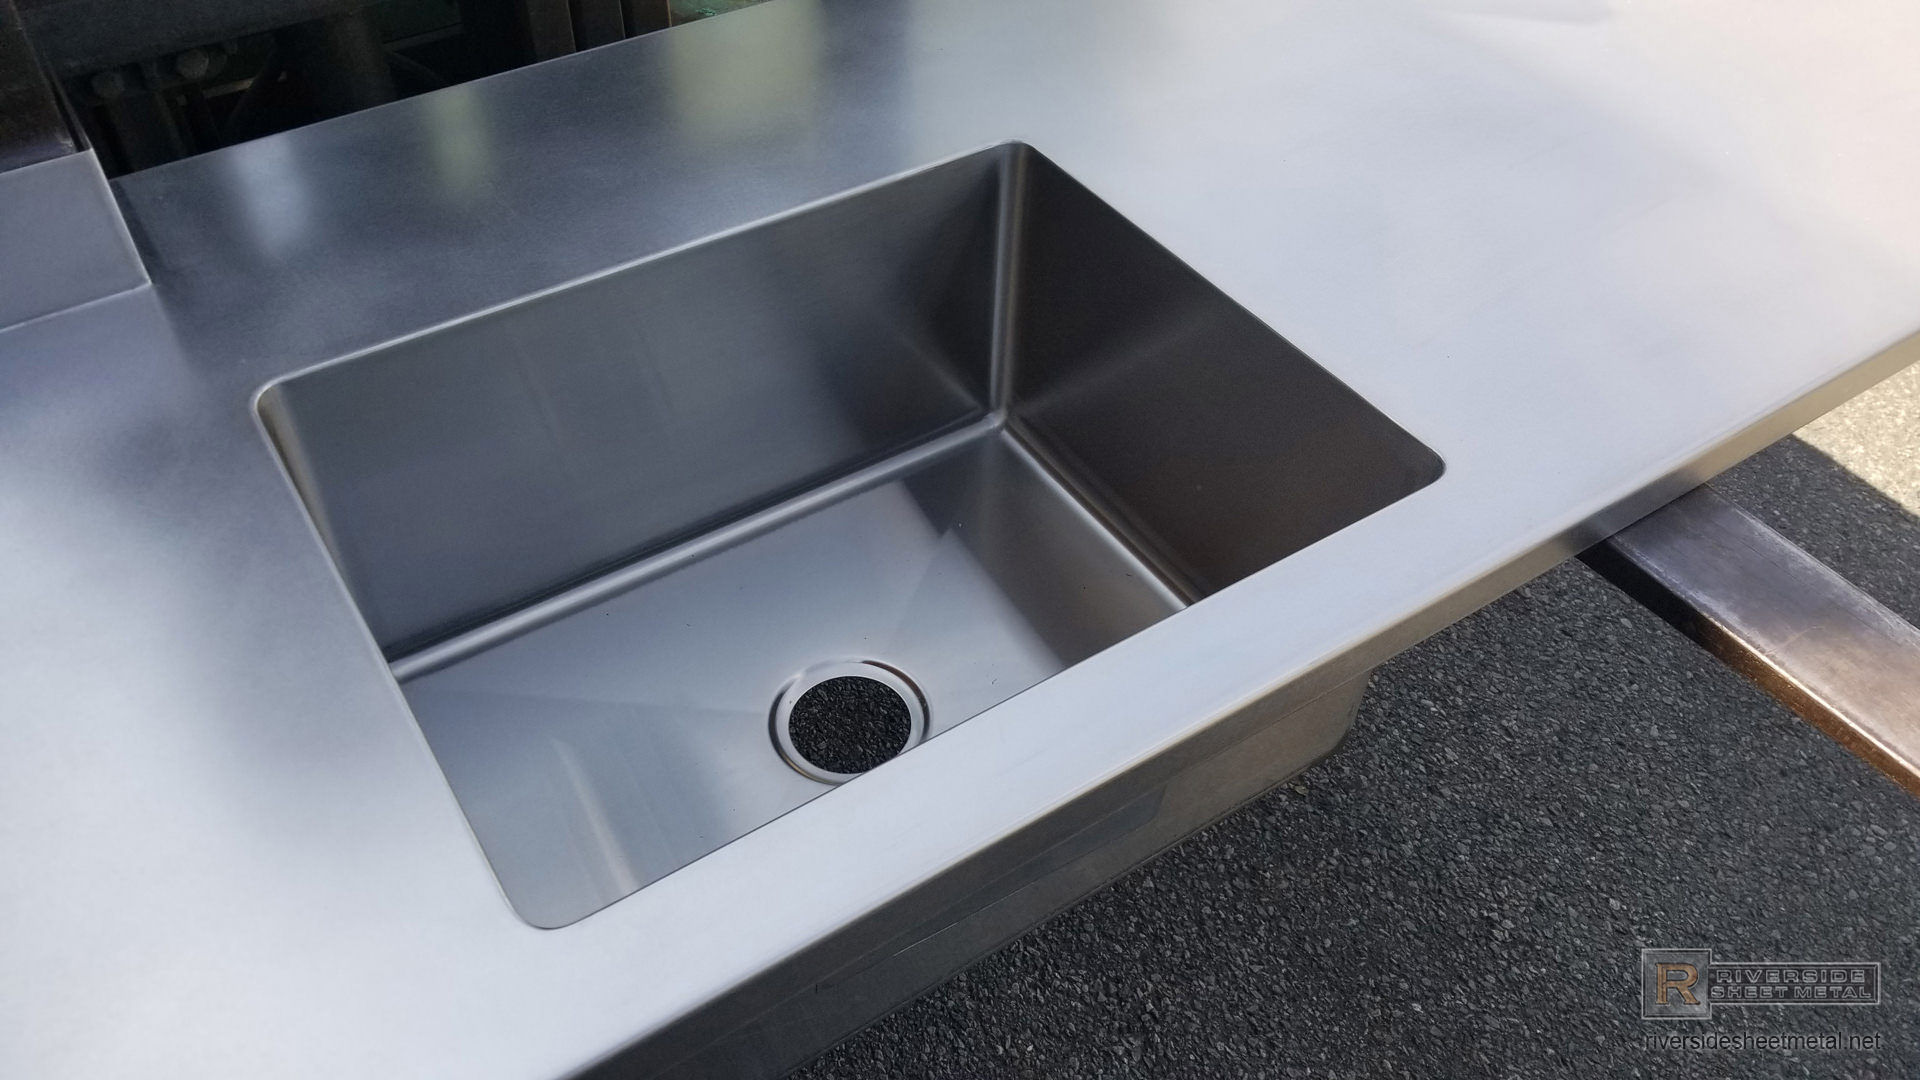 Satin Finish Stainless Steel Counter, Stainless Countertop With Sink